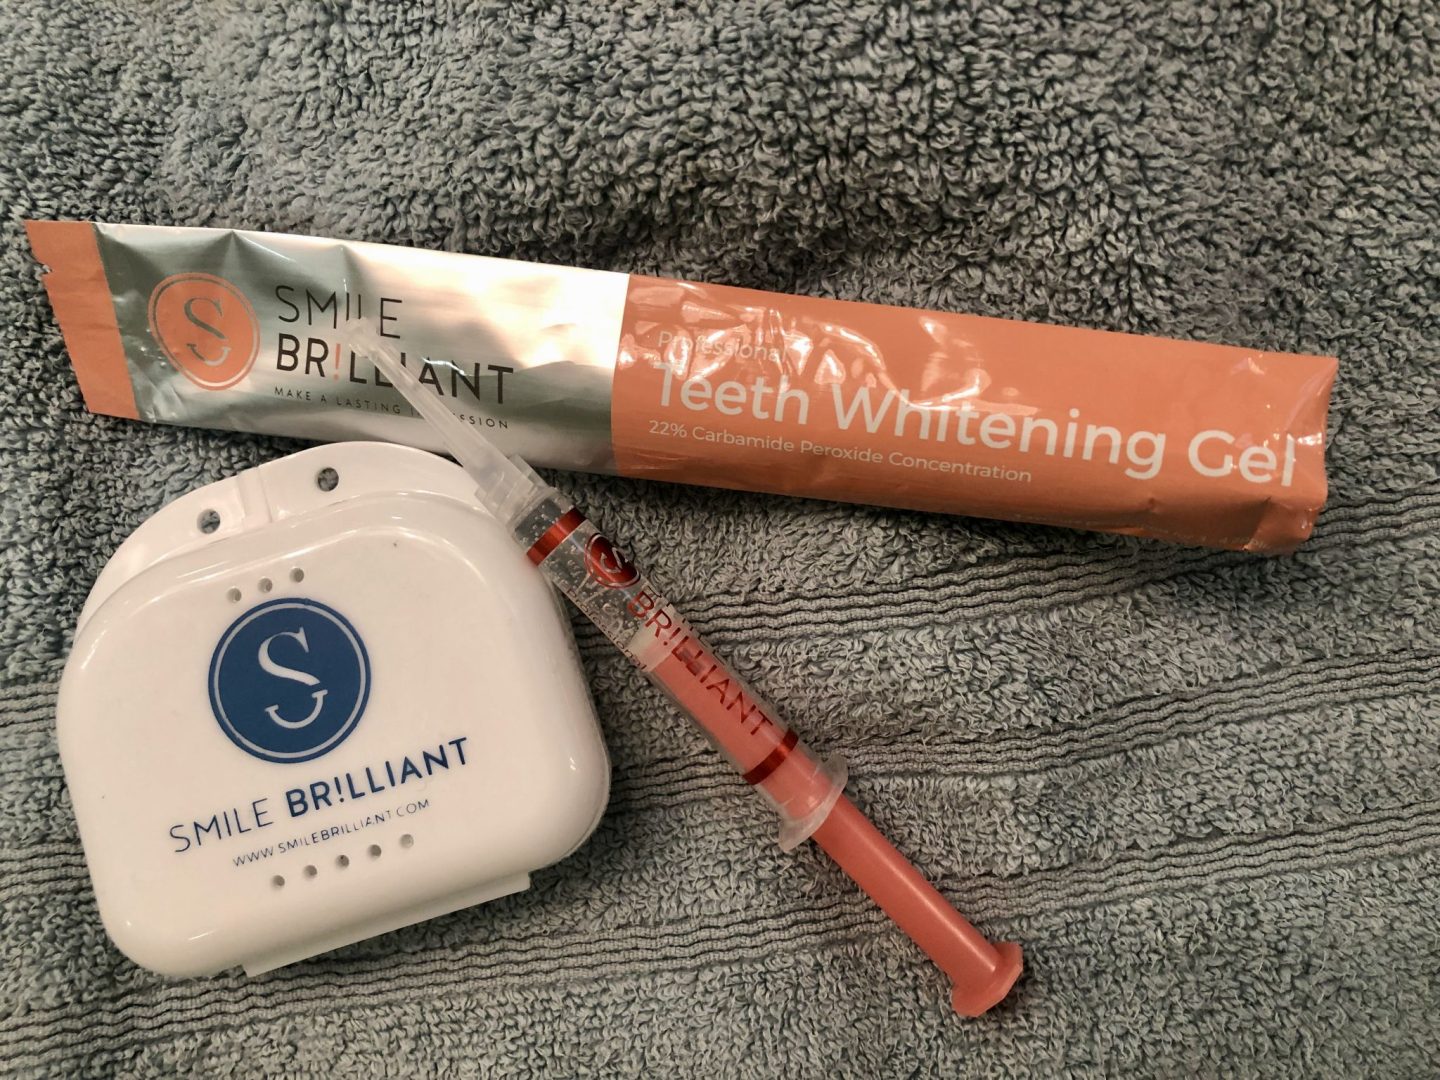 Teeth Whitening for Sensitive Teeth and a Giveaway